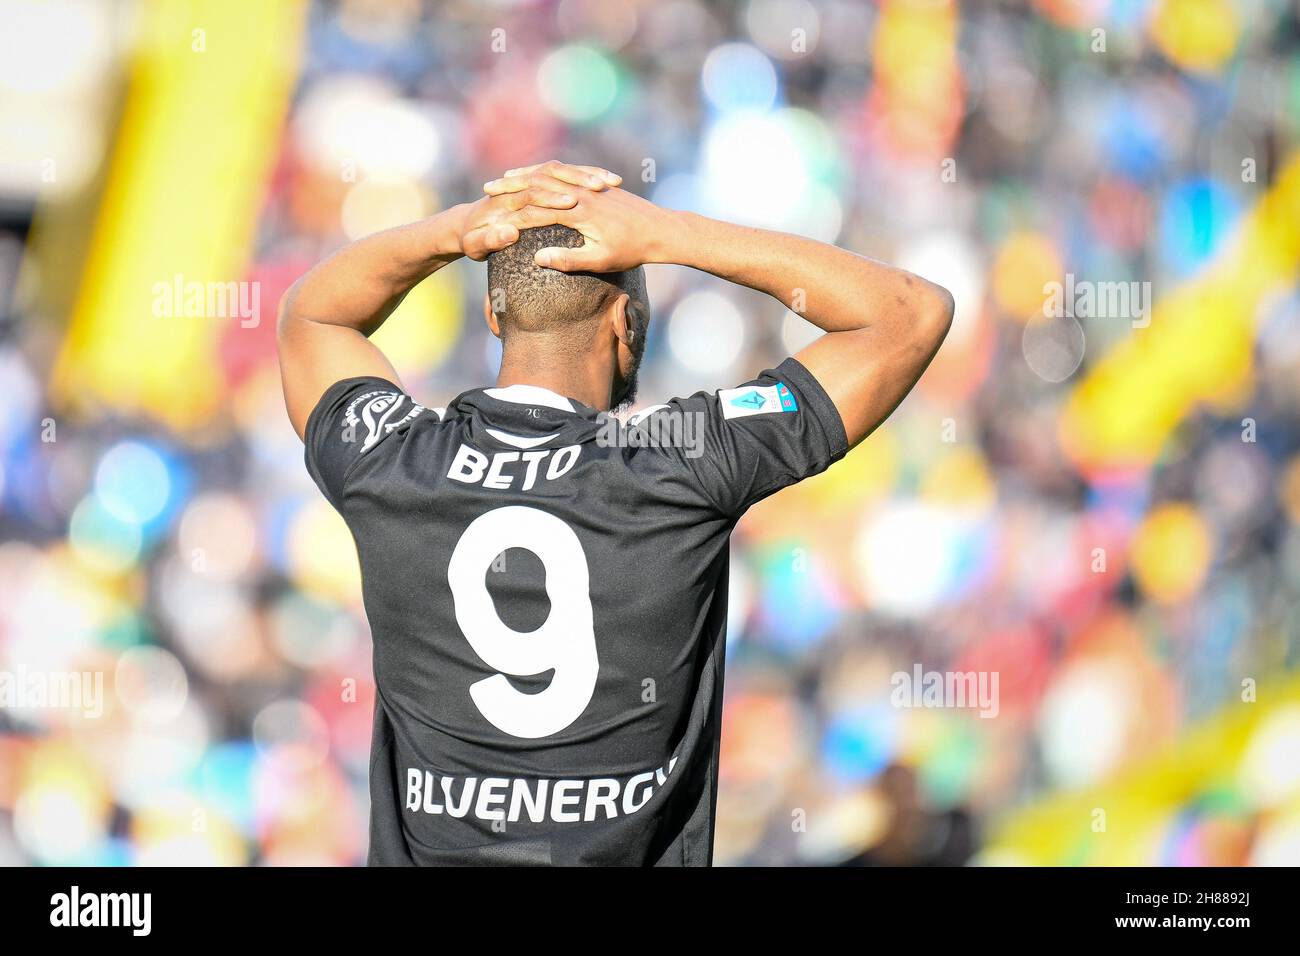 Friuli - Dacia Arena stadium, Udine, Italy, November 28, 2021, Norberto Bercique Gomes Betuncal (Udinese) reacts after missing the goal  during  Udinese Calcio vs Genoa CFC - italian soccer Serie A match Stock Photo